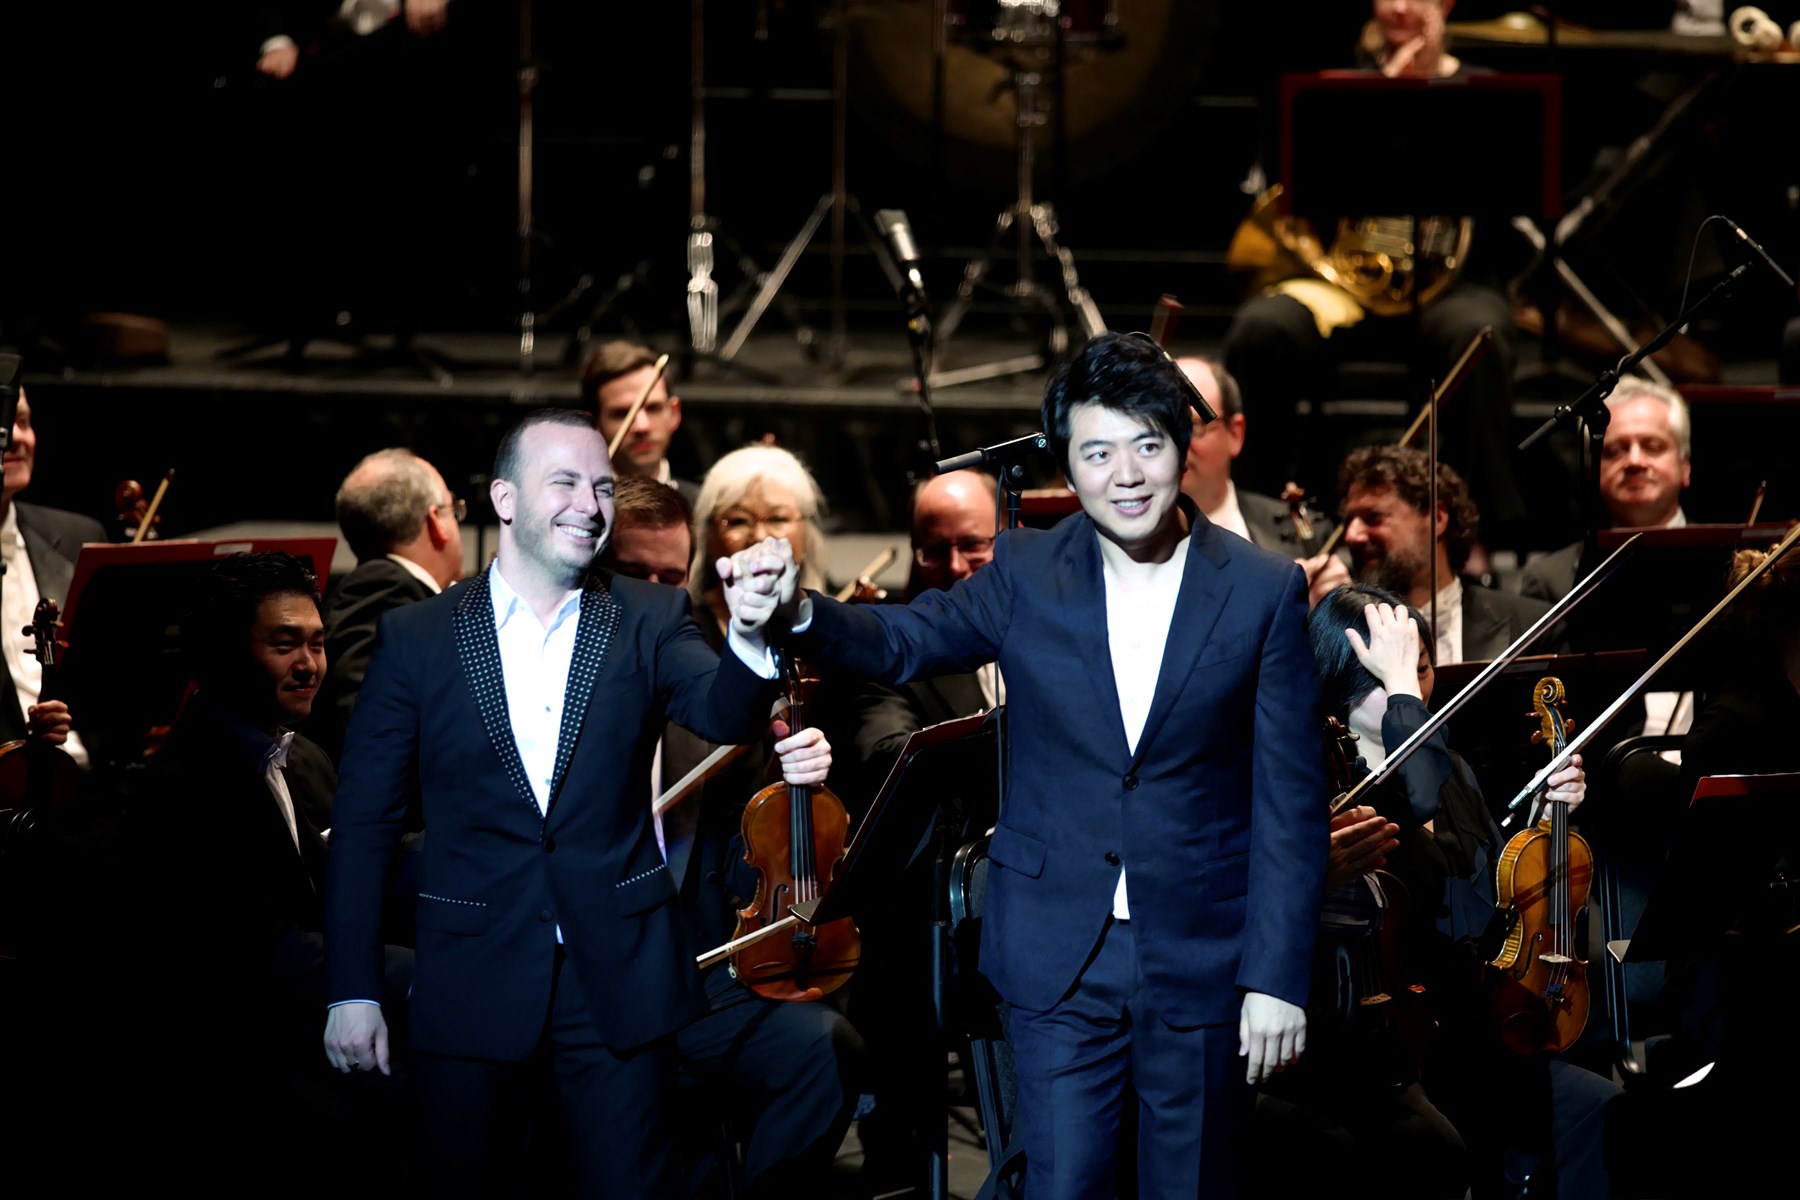 The Philadelphia Orchestra with Lang Lang at The Venetian Macao